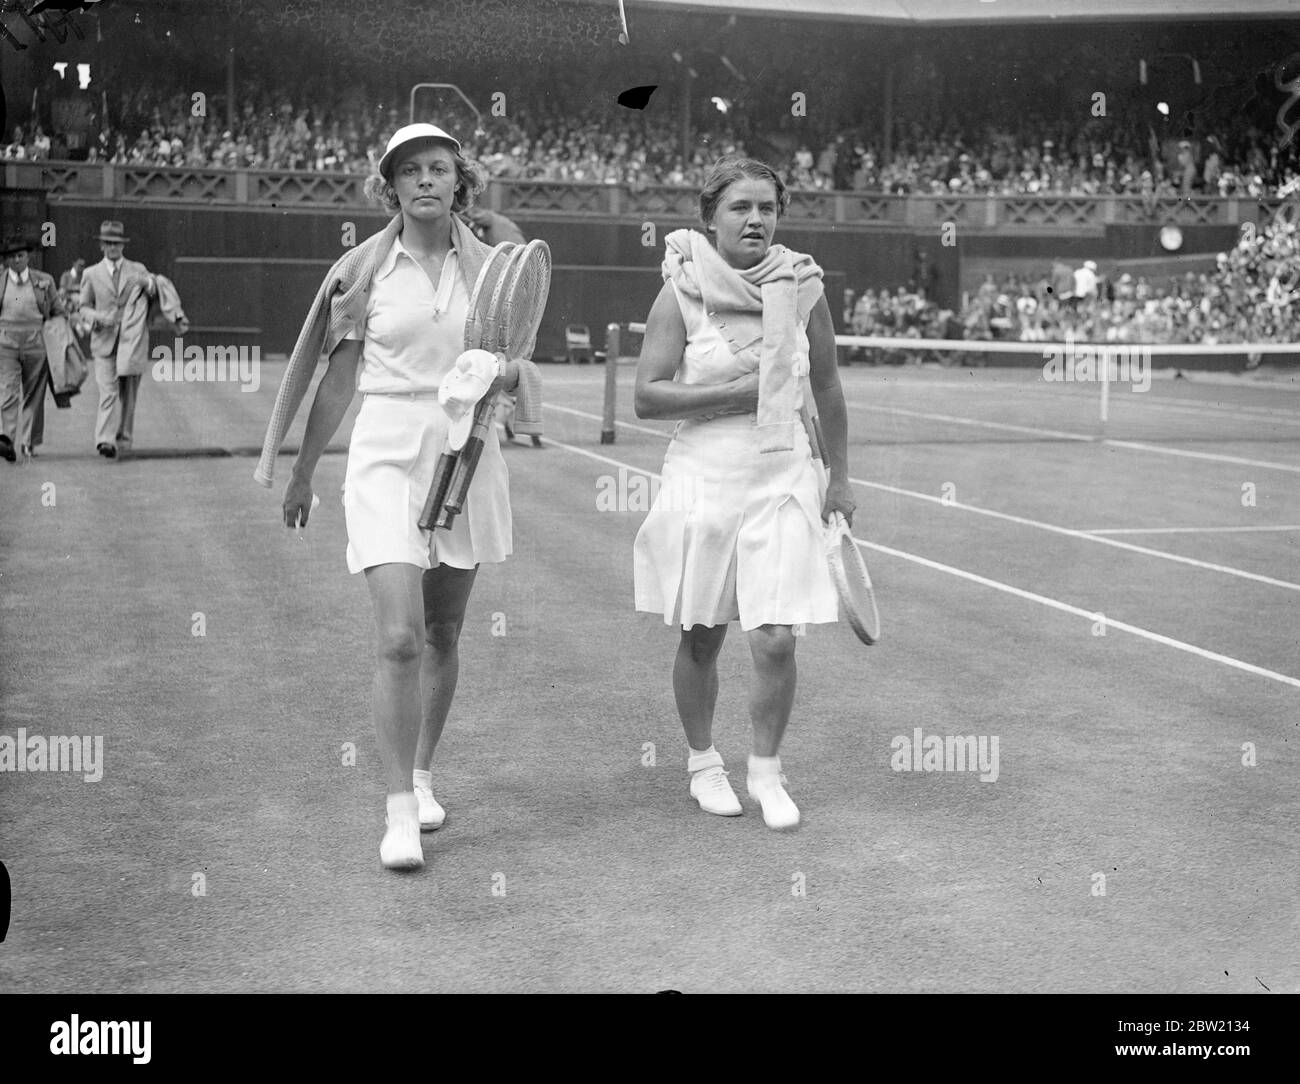 Mme J. Jedrzejowska of Polland and Miss Alice Marble walking off the Centre Court after their match. Mme Jedrzejowska beat Miss Marble, the American women's champion, 8 - 6, 6 - 2, in the semi-final women's singles at Wimbledon. 1 July 1937 Stock Photo